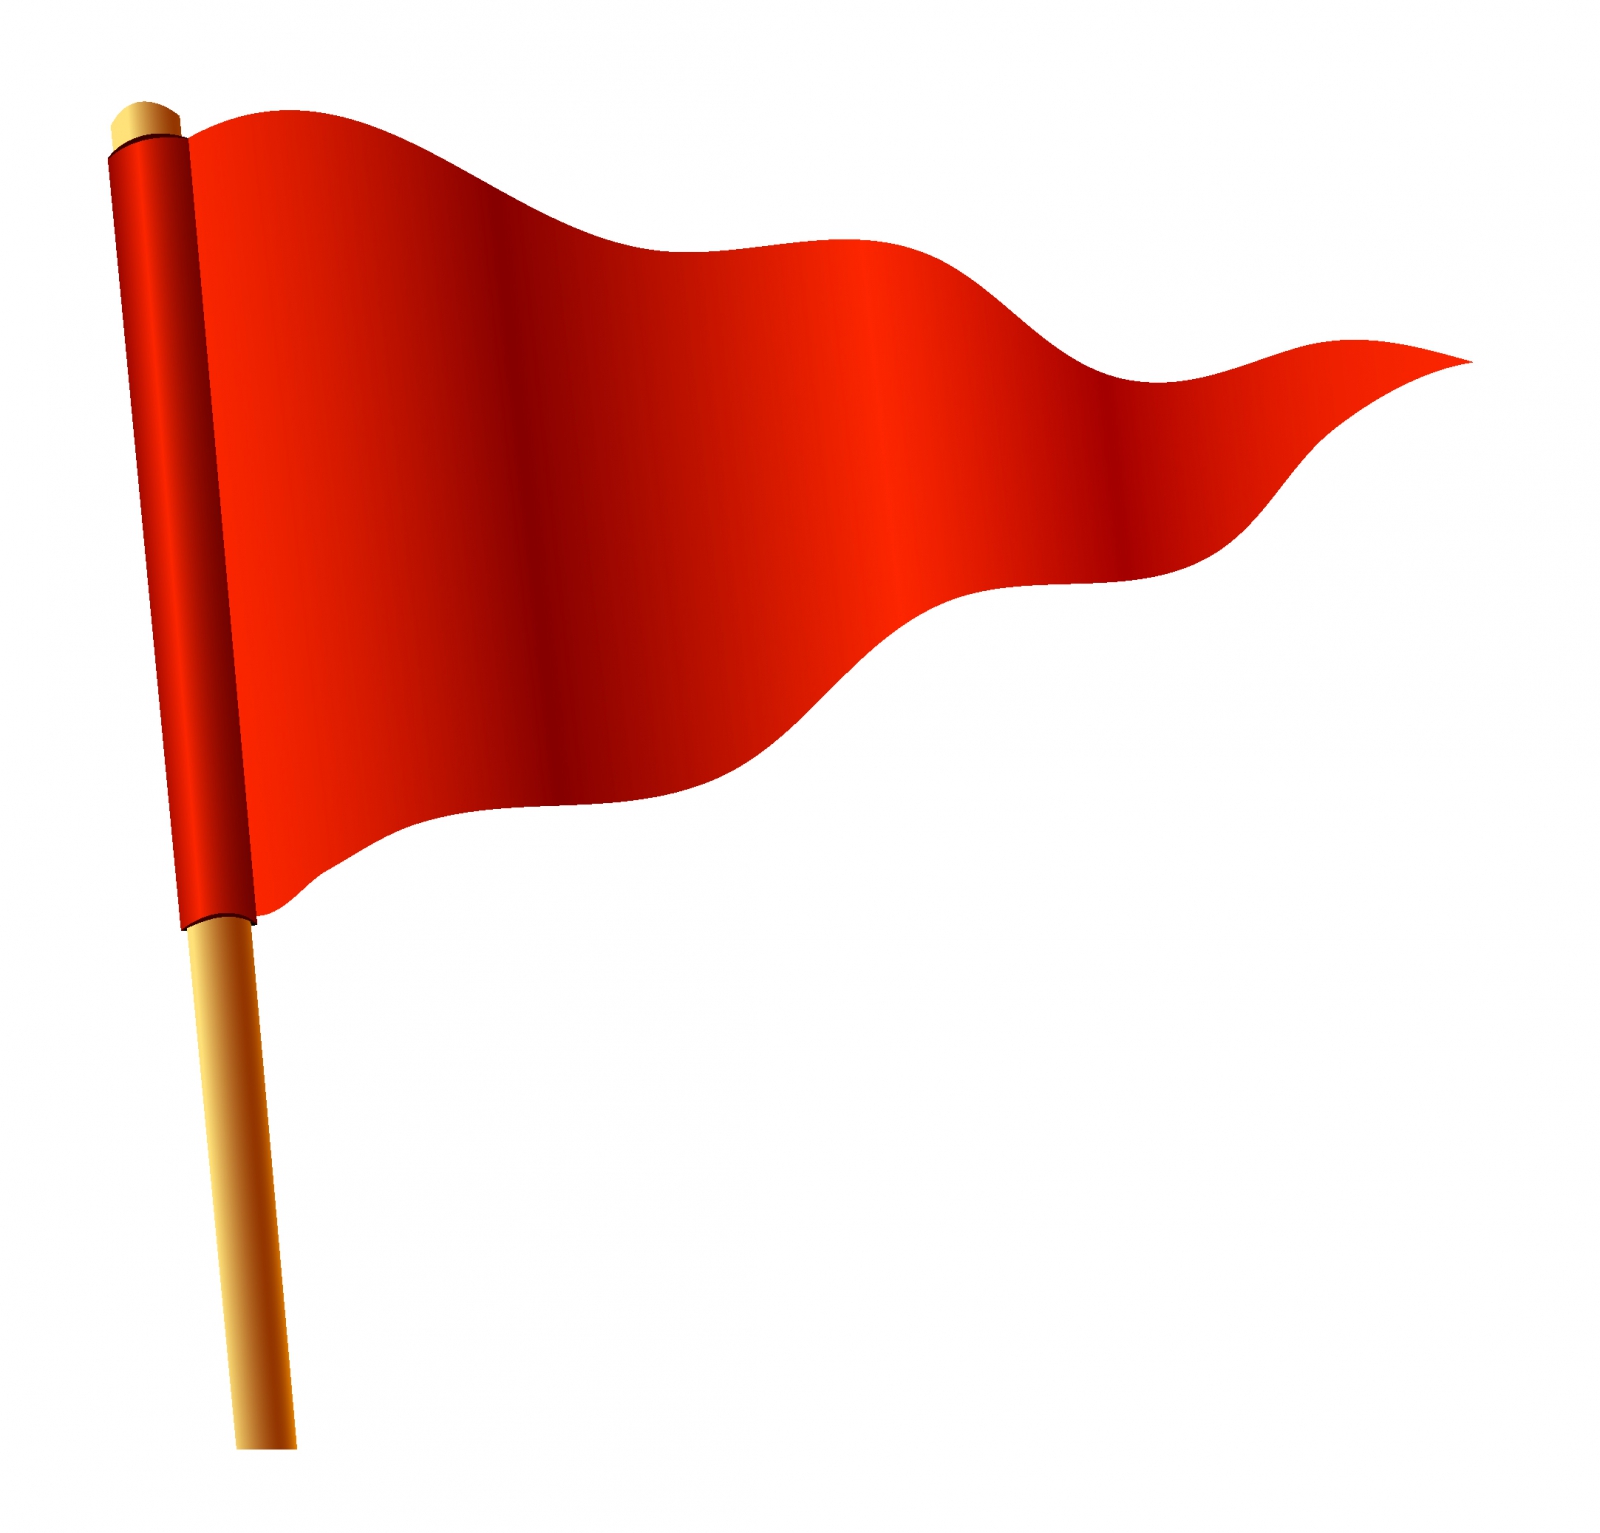 Waving Red Triangular Flag Free Vector - Triangle Flag, Transparent background PNG HD thumbnail